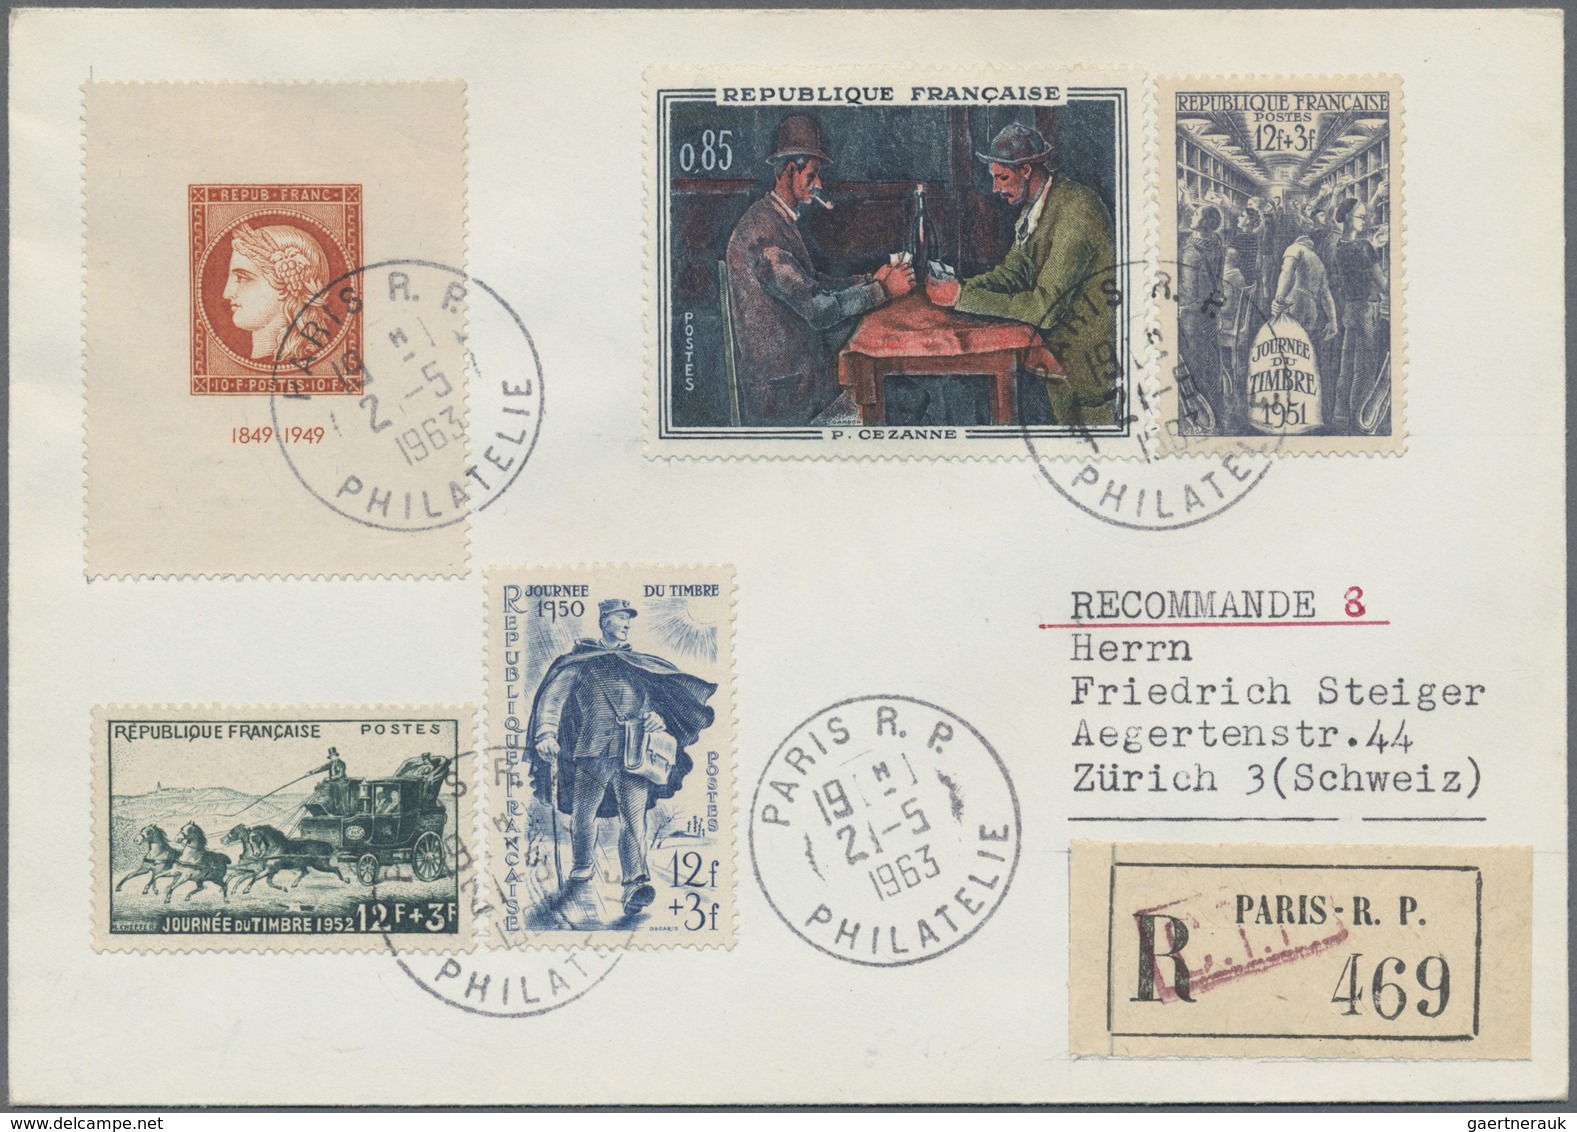 Br Frankreich: 1860/2014 (ca.), enormous accumulation of more than 2.000 covers/cards (roughly estimate